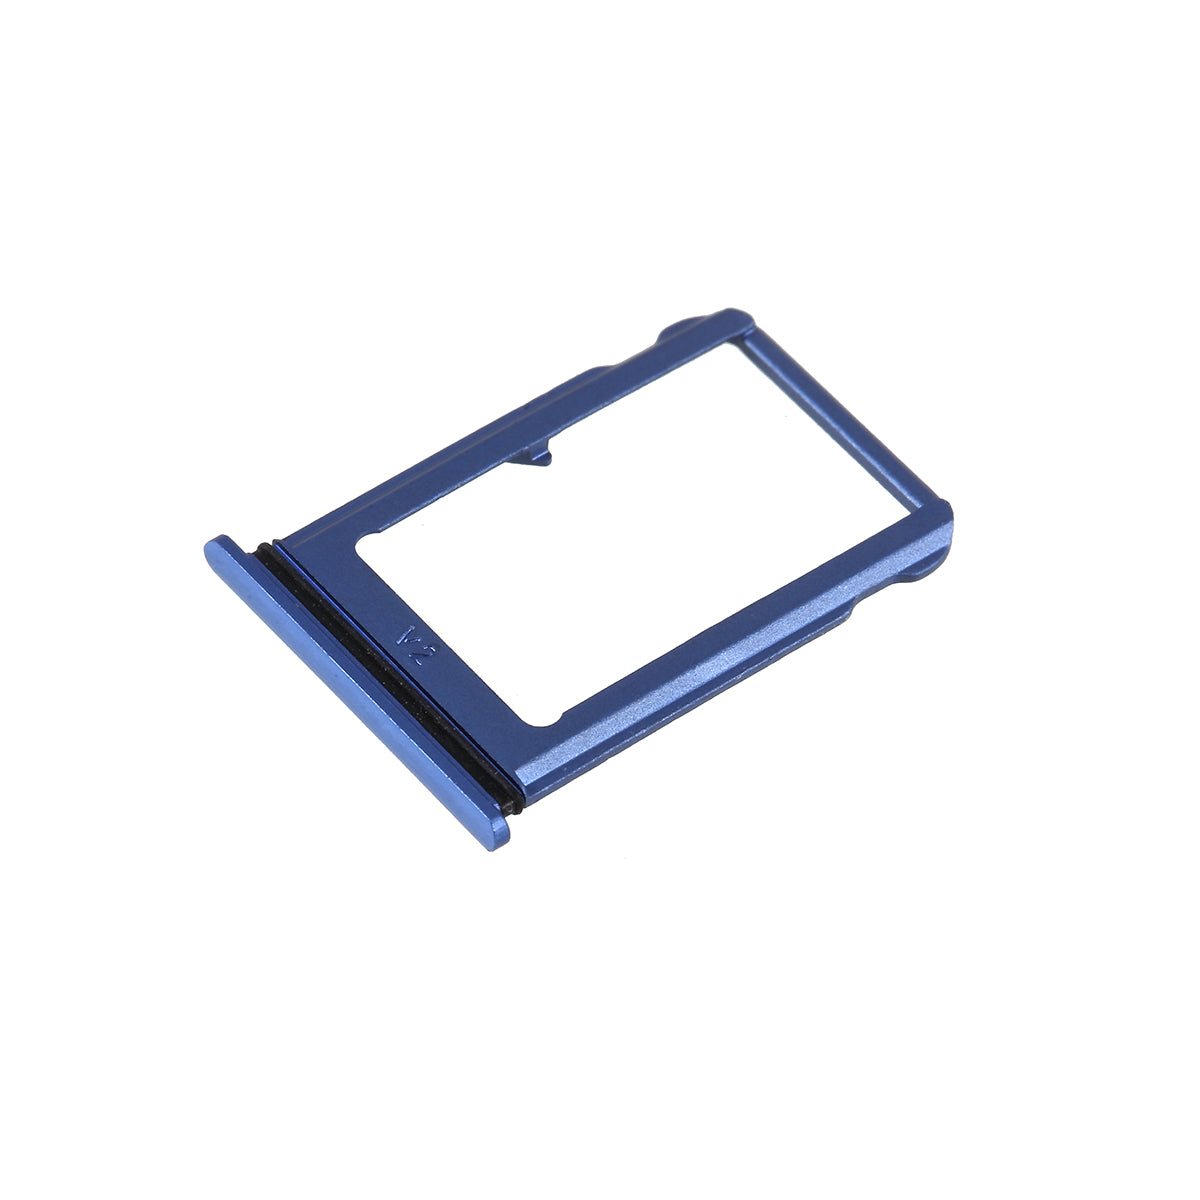 OEM Dual SIM Card Tray Holder Replace Part for Xiaomi Mi 9 - Blue